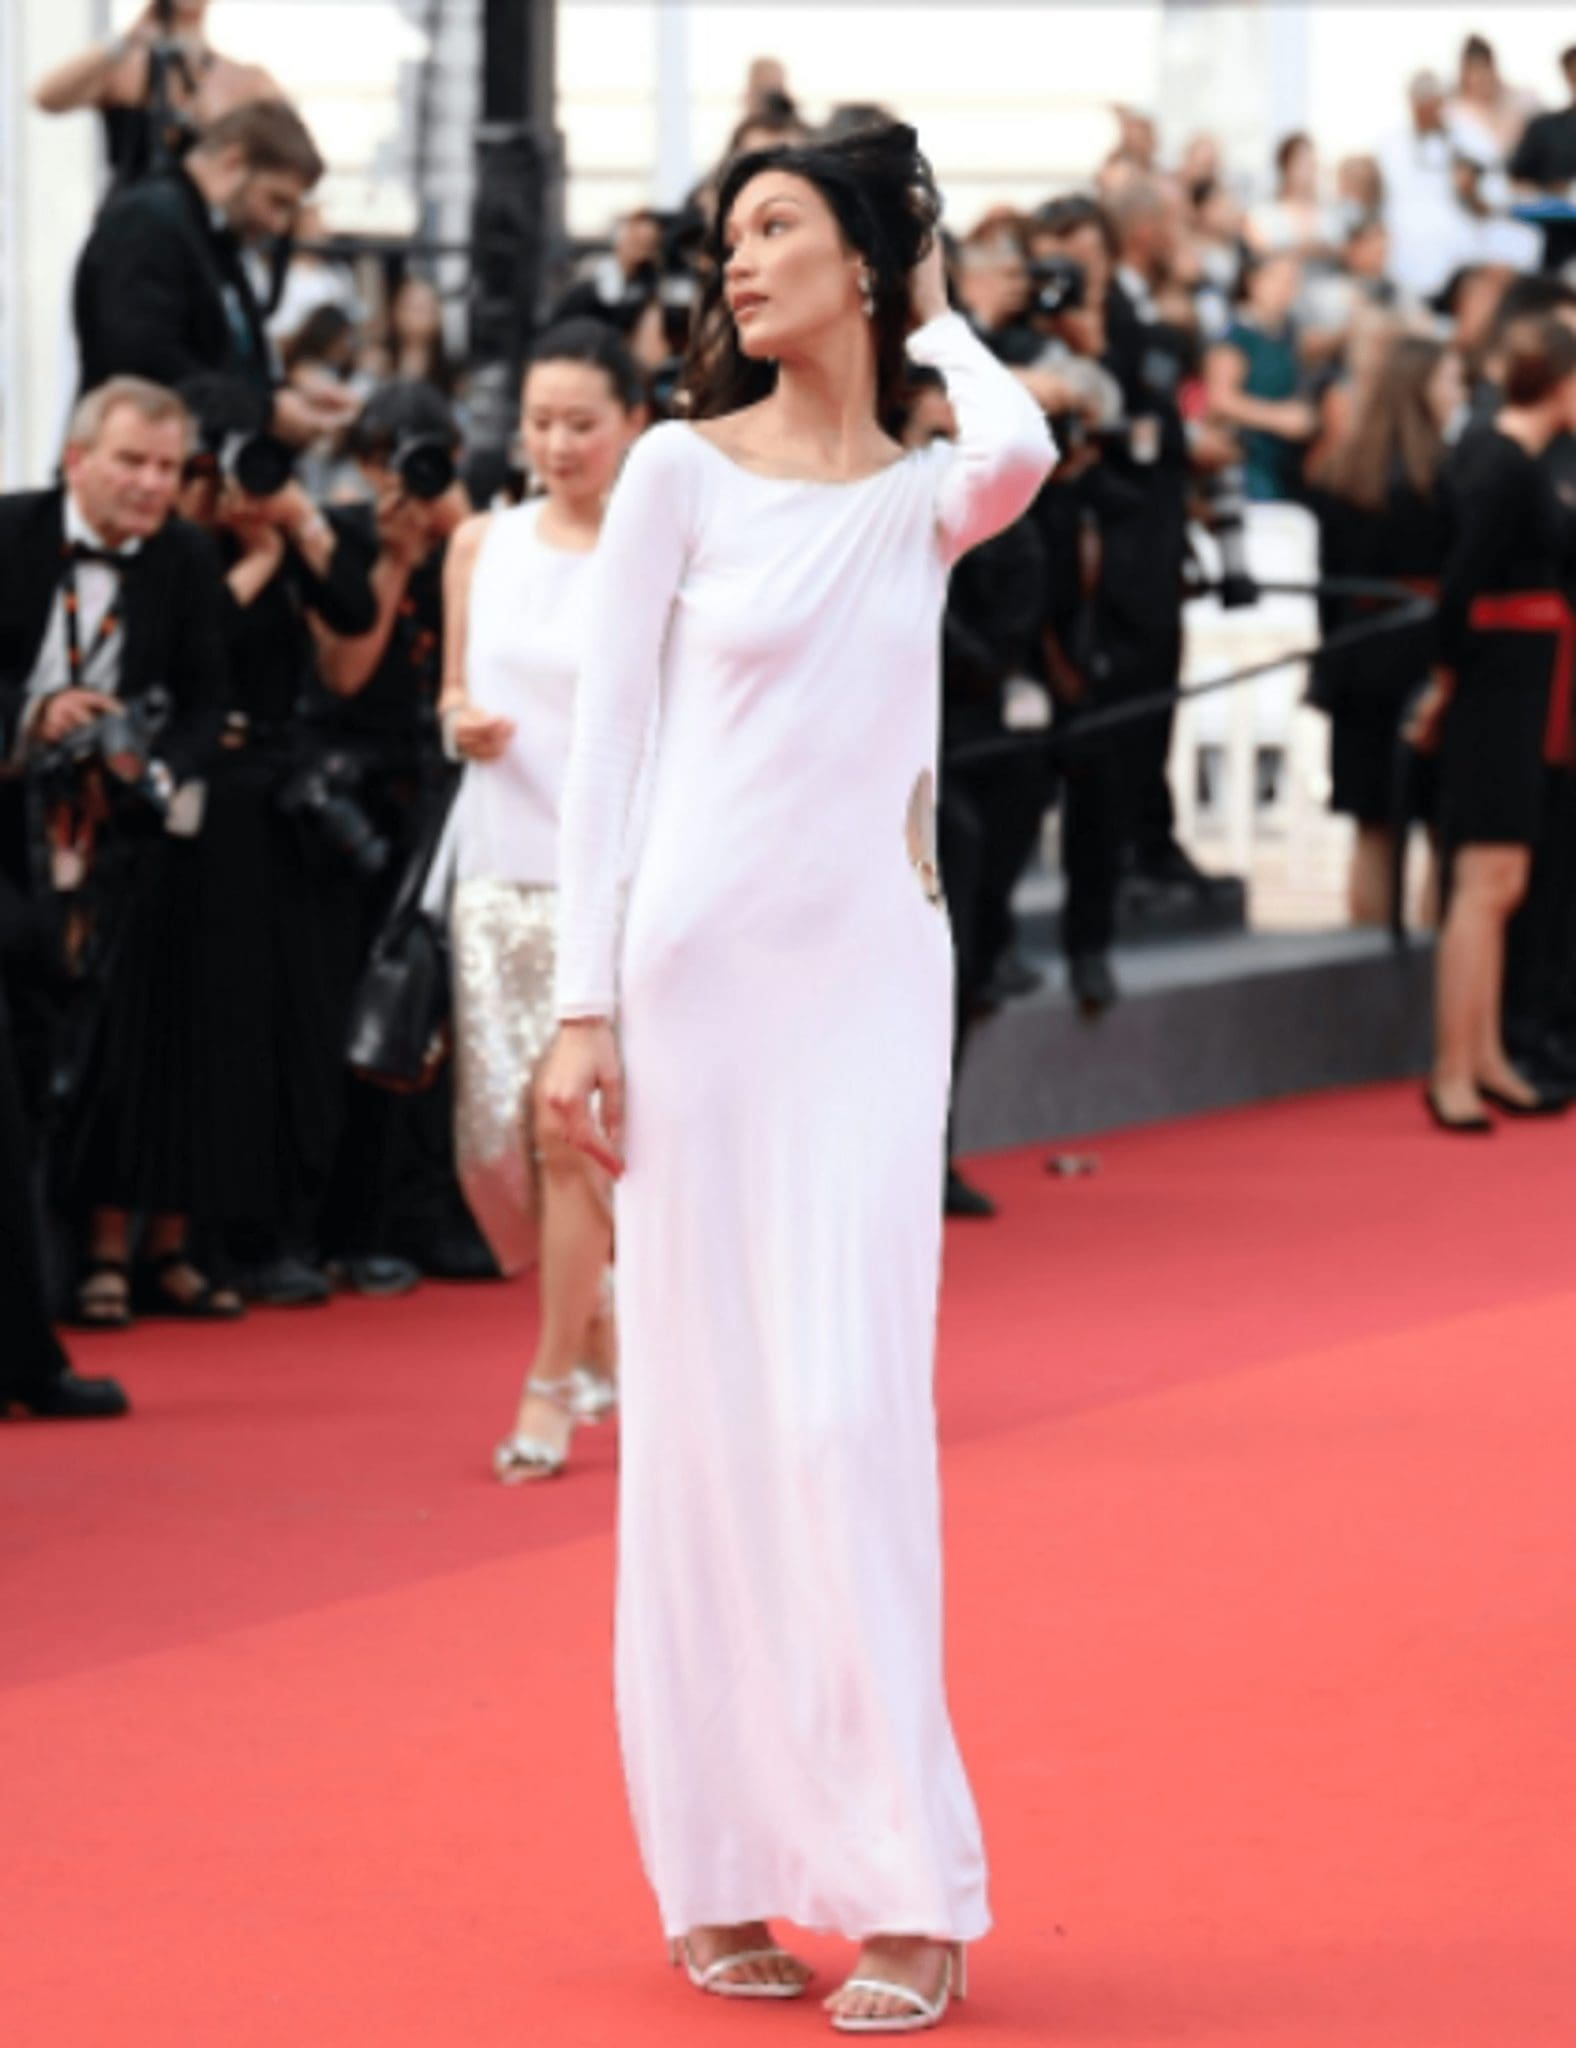 Bella Hadid, in a vintage Gucci dress with a slit on the thigh, took to the red carpet of Cannes